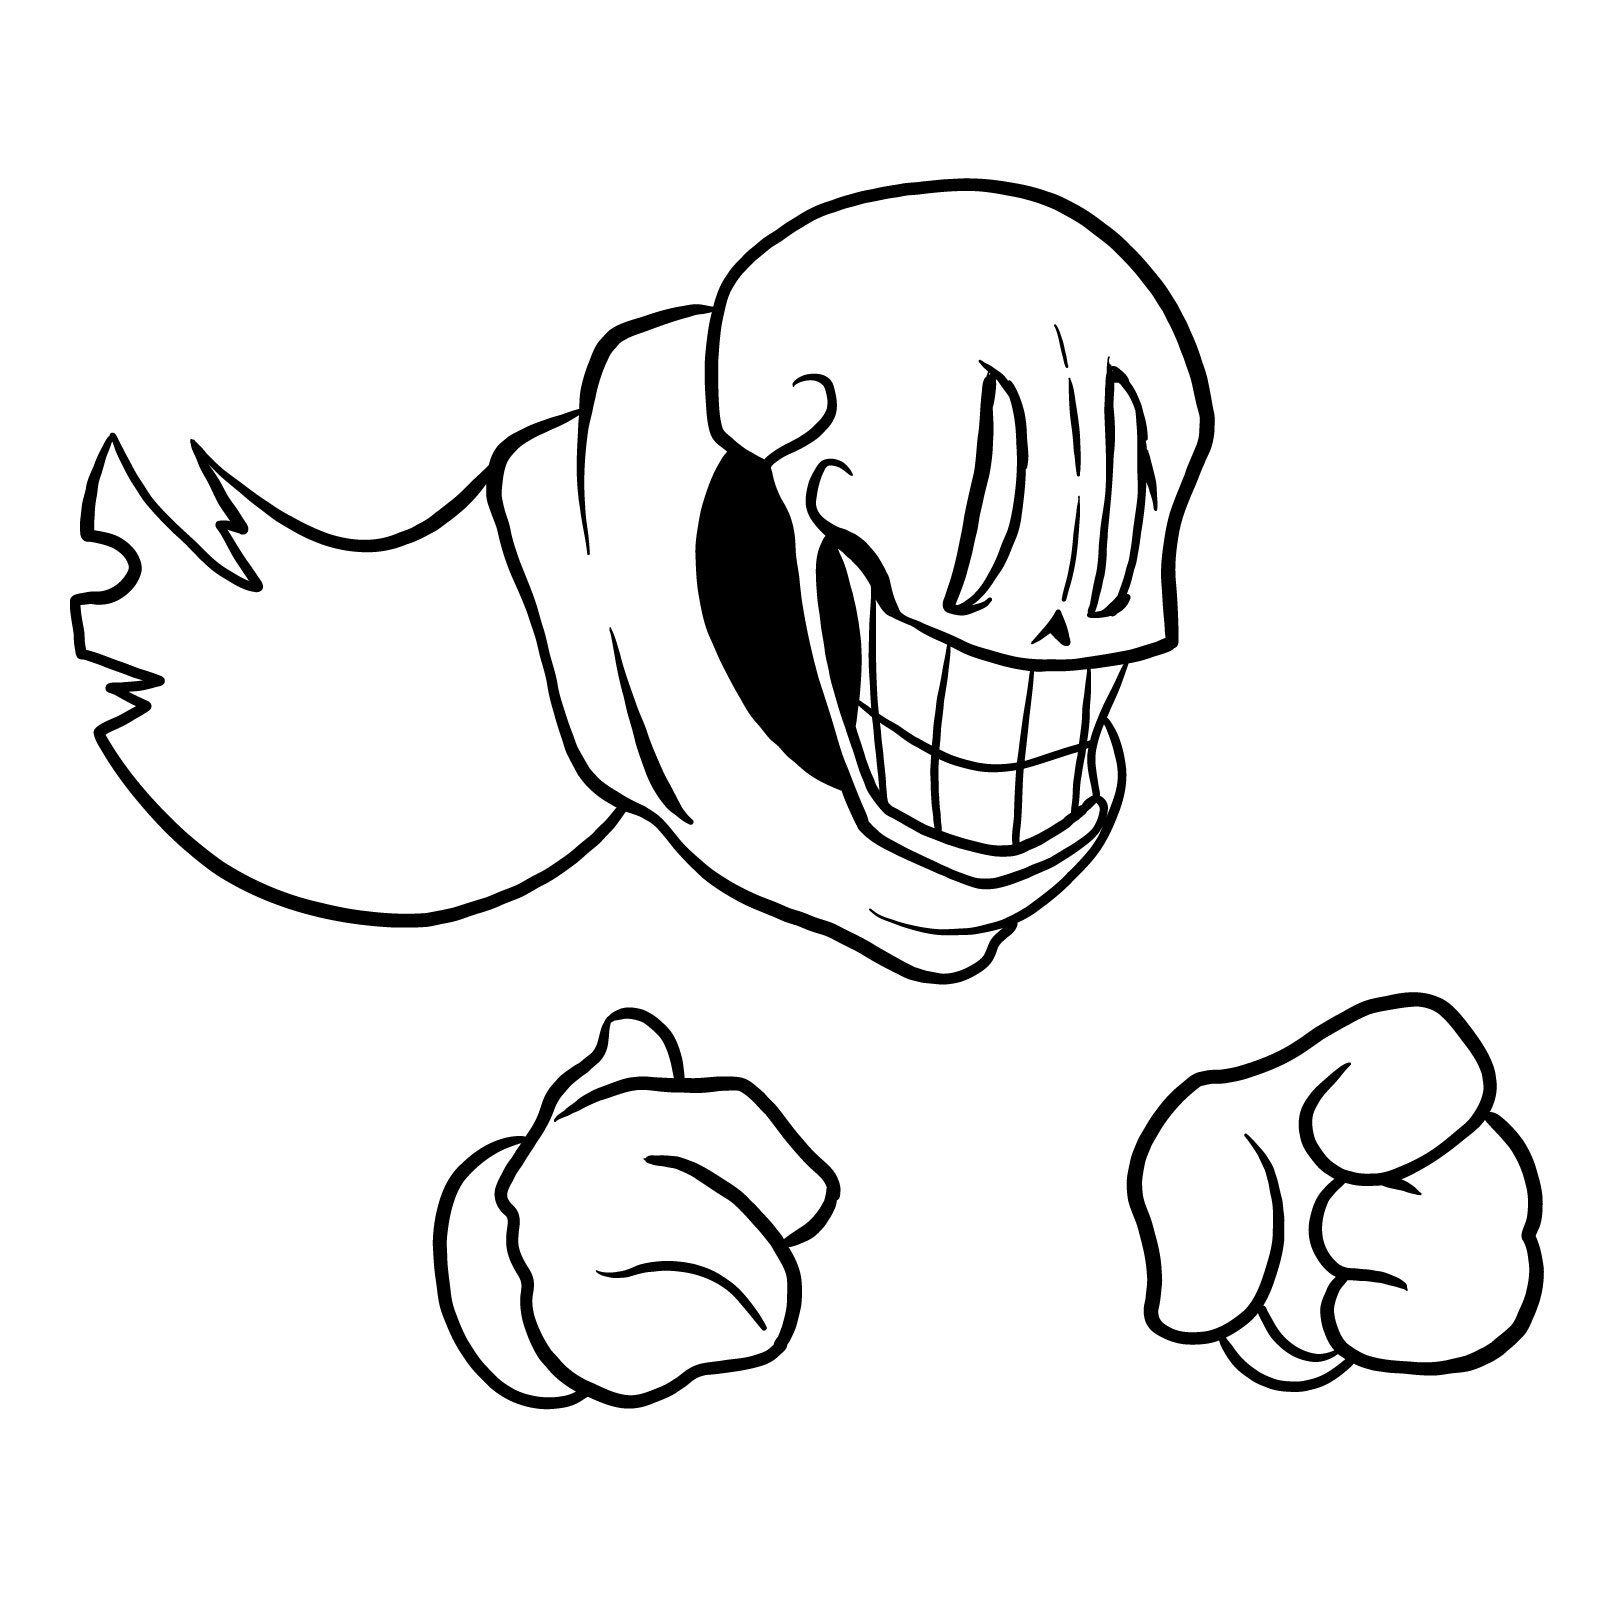 How to draw Phantom!Papyrus from FNF - coloring